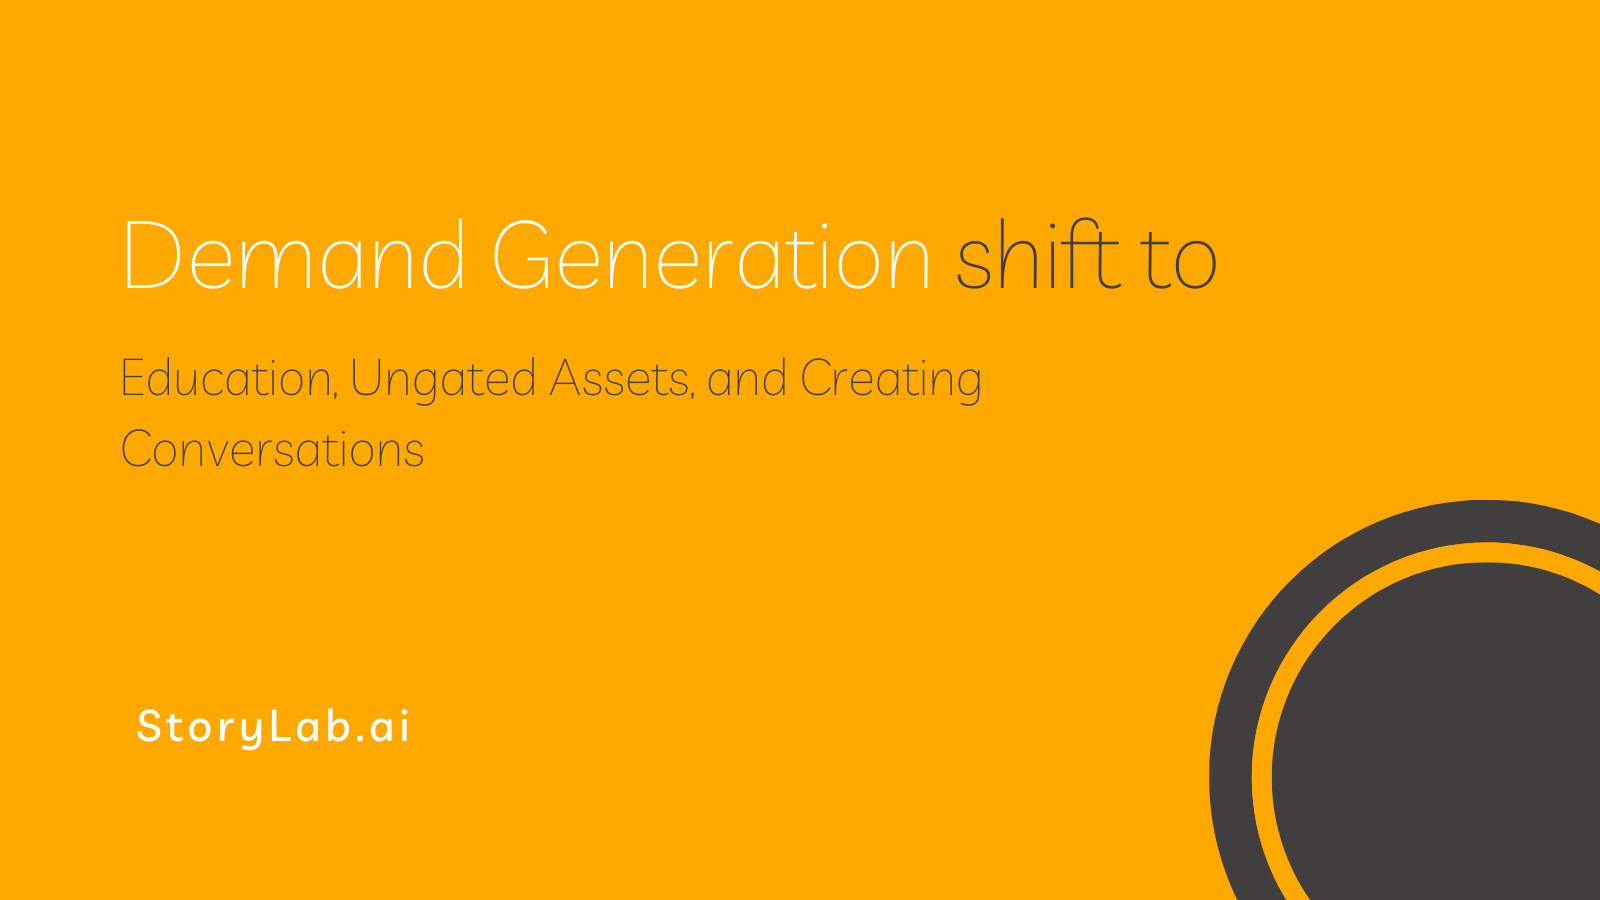 Demand Generation shift to Education, Ungated Assets, and Creating Conversations